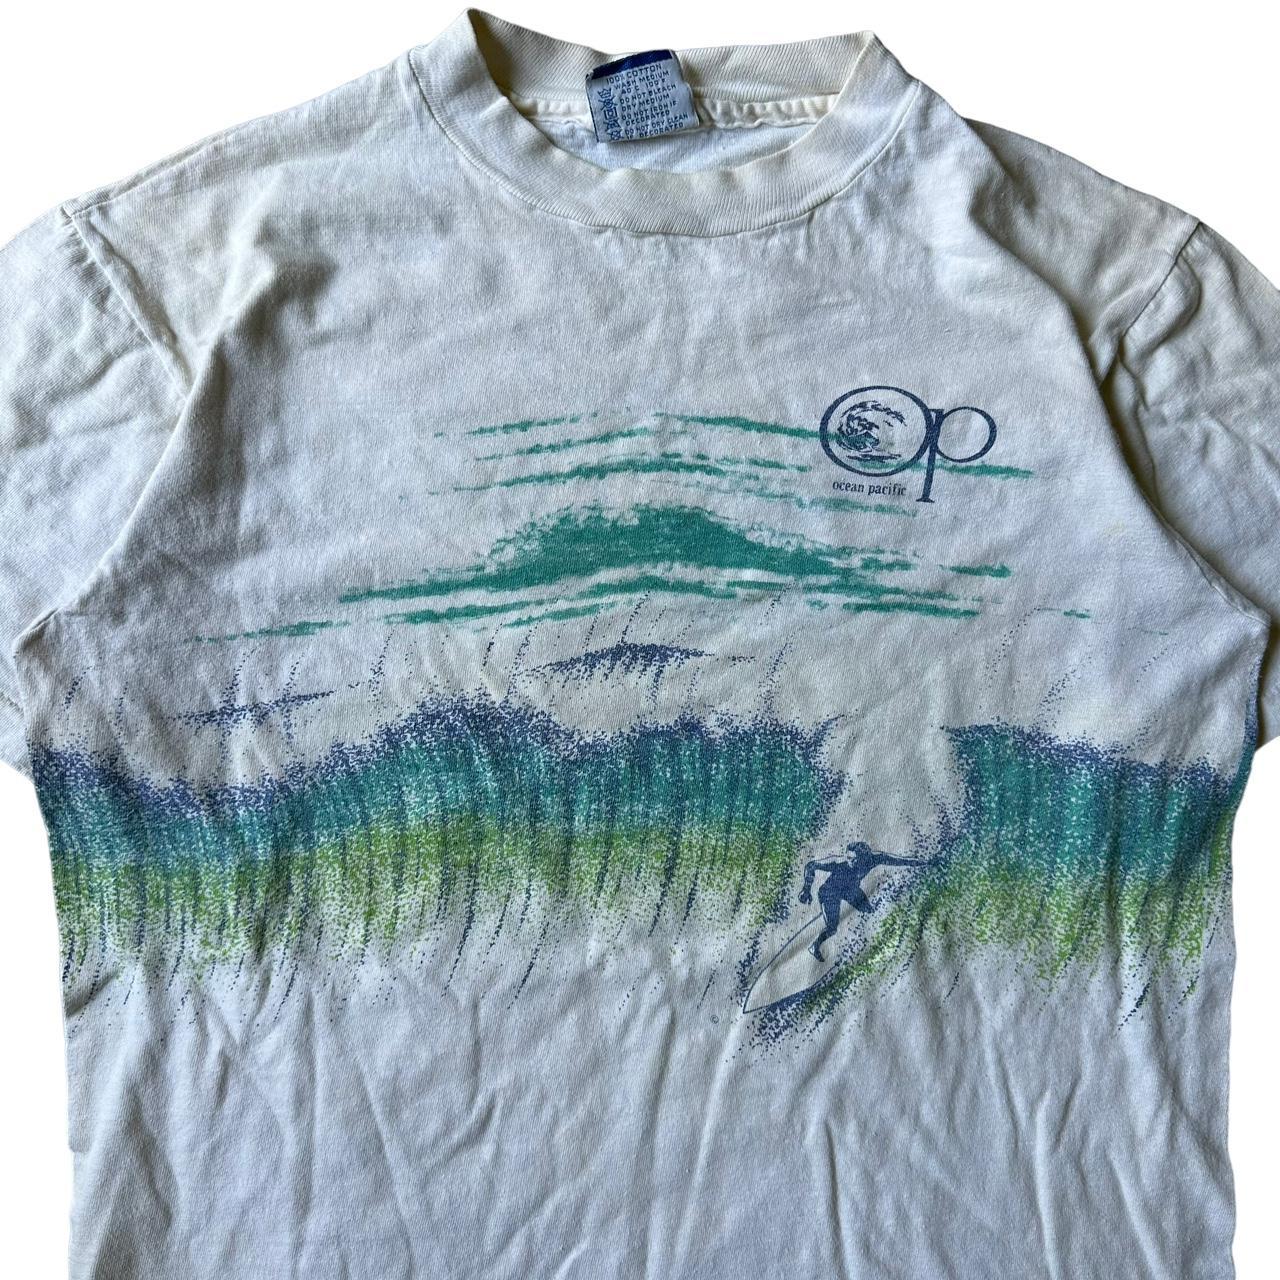 Ocean Pacific Men's White and Green T-shirt (2)